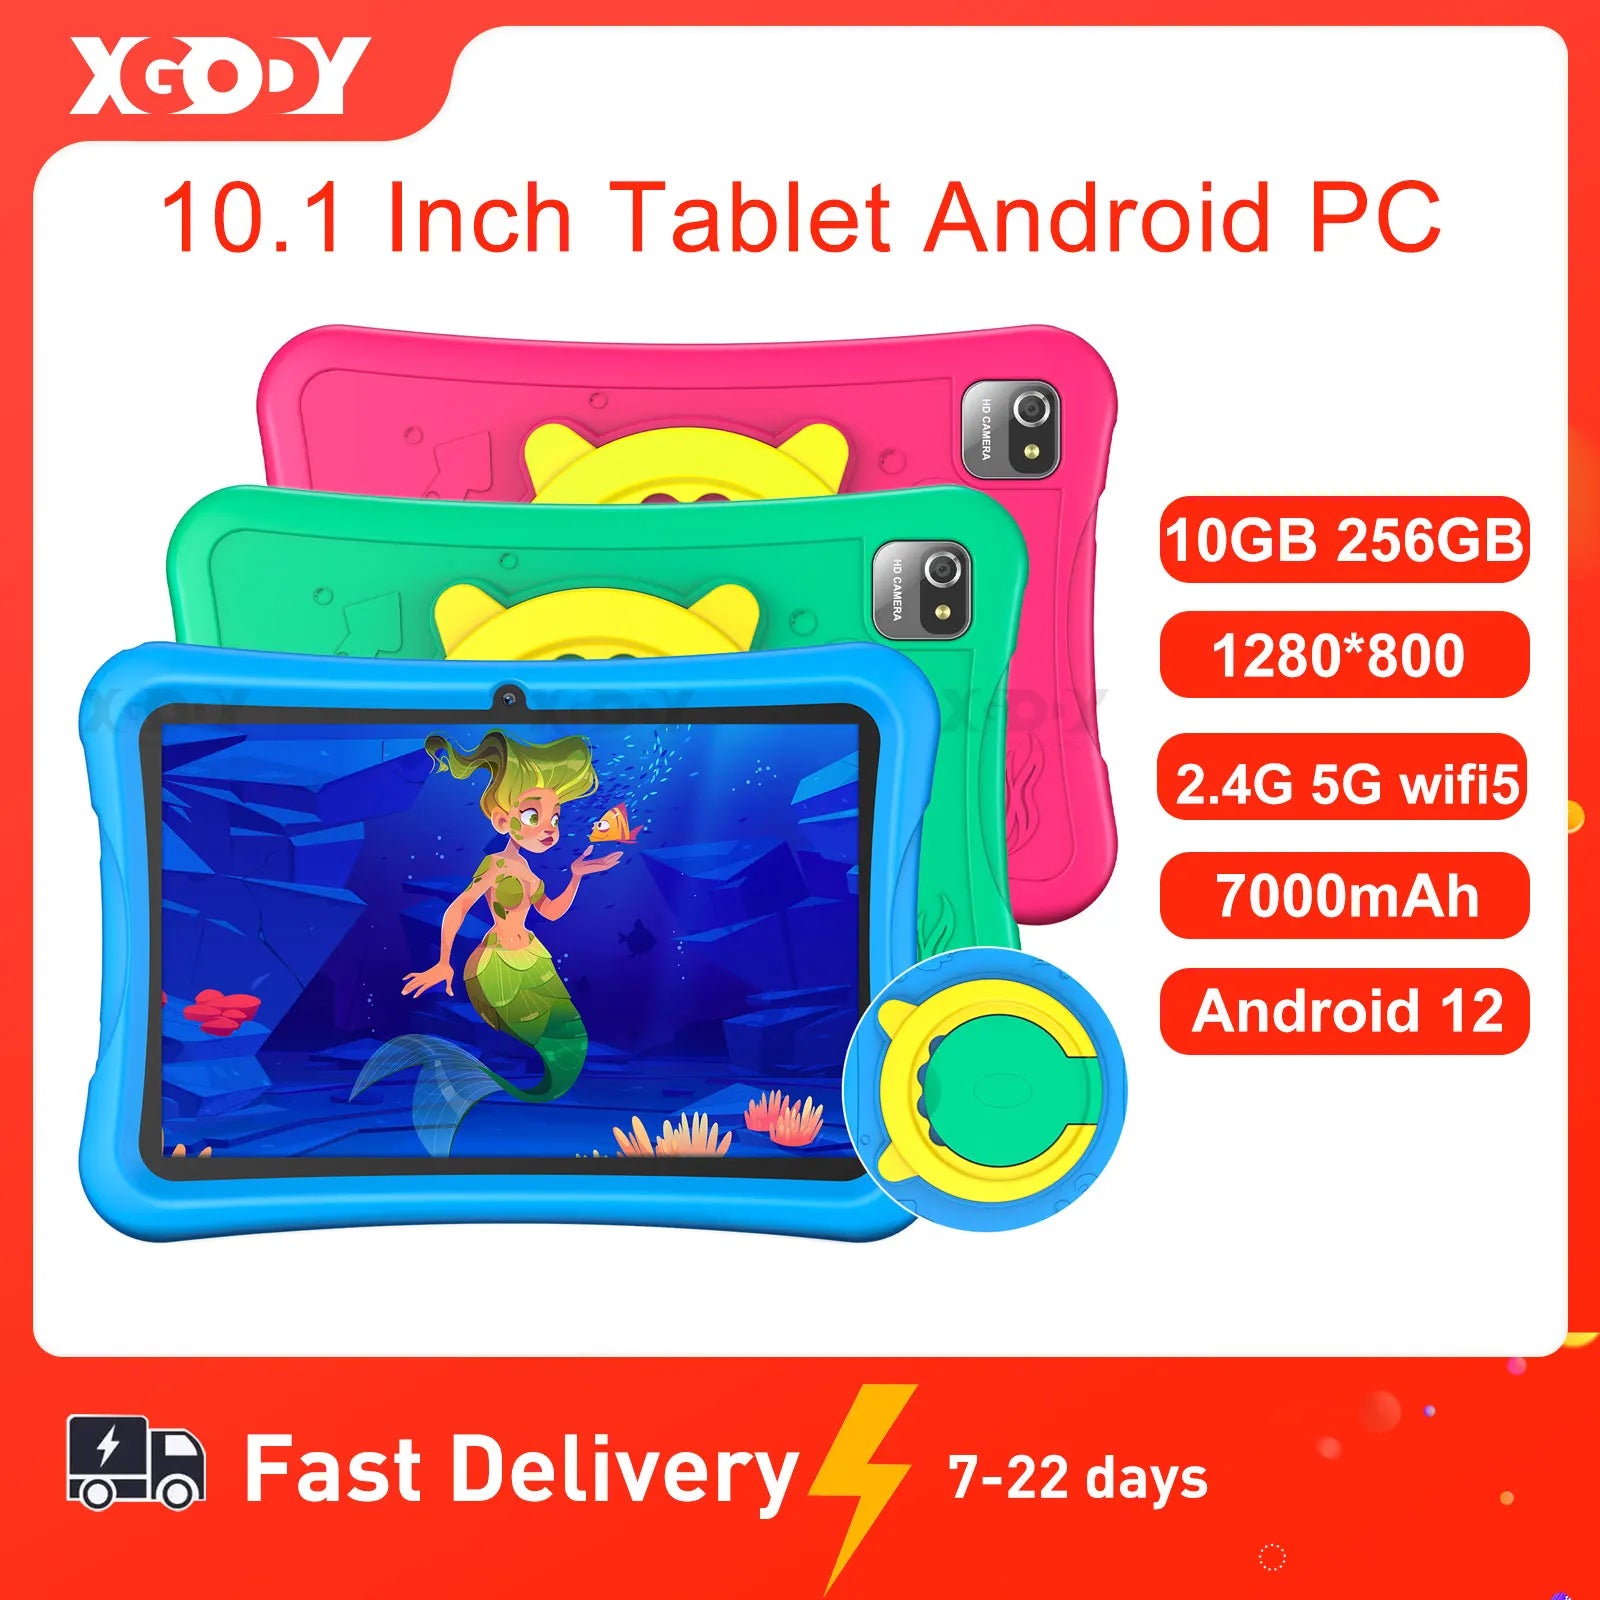 XGODY 10 Inch Tablet Android 12 Tablets For Kids Pad N01 Pro PC Original IPS Screen Cute Protective Case Free Delivery Shipping